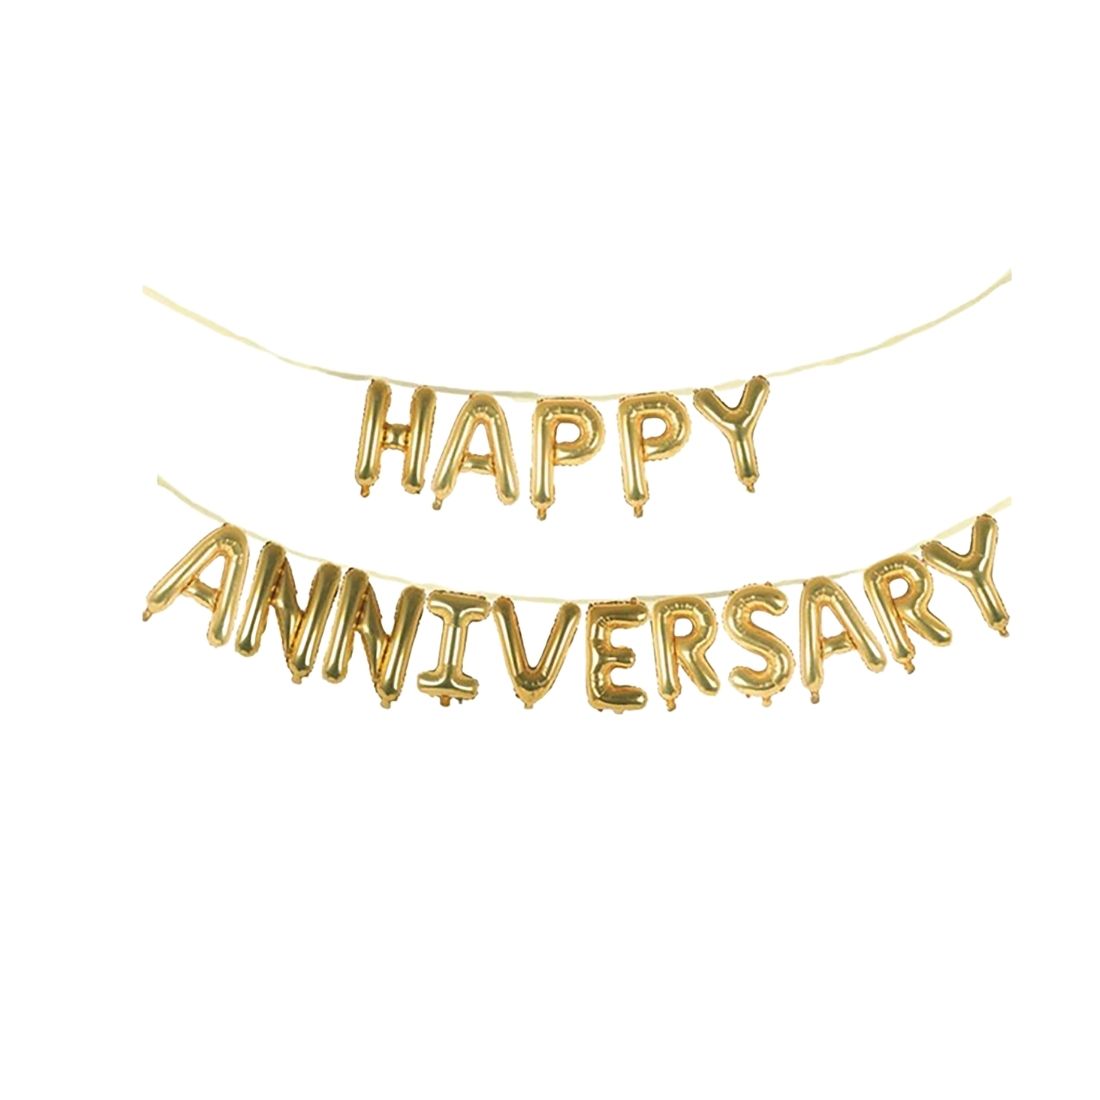 Happy Anniversary Decorations Foil Balloon for Home Decoration 16″Size for Husband Wife/ Anniversary Celebration Balloons